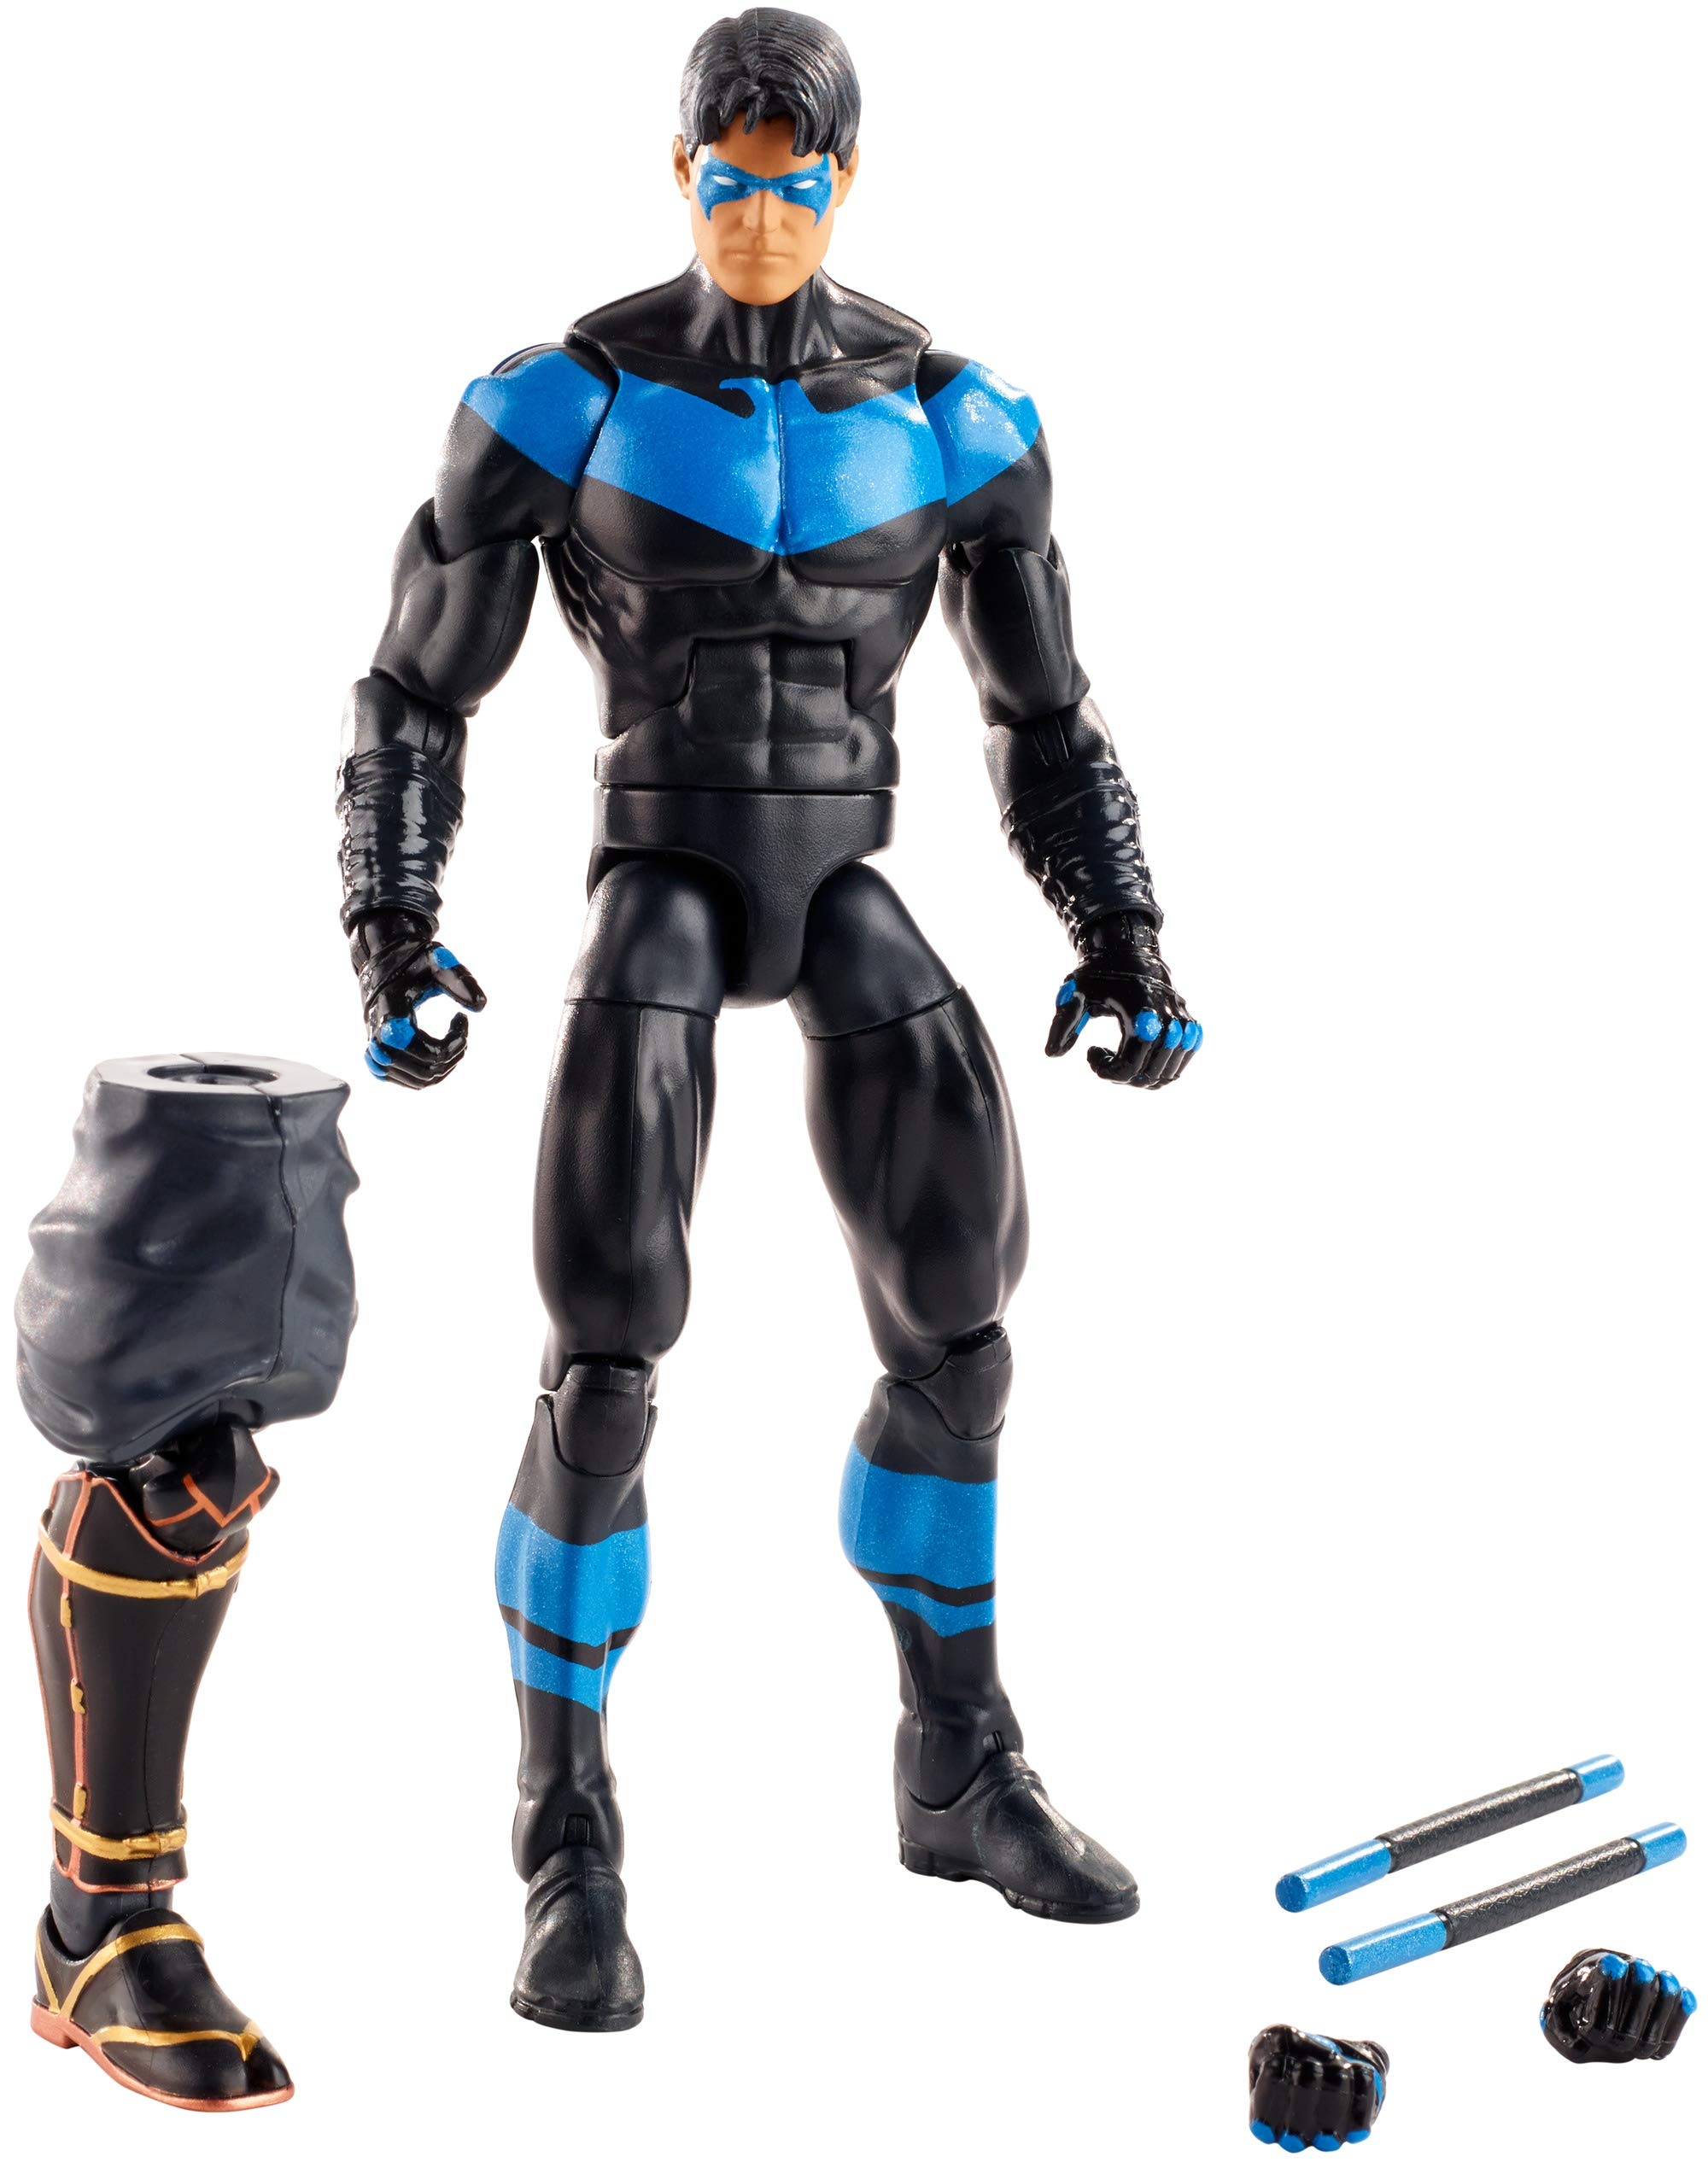 Book Cover DC Super Friends Multiverse Nightwing action figure, highly detailed, collectible, 6-inch scale Nightwing (Rebirth)